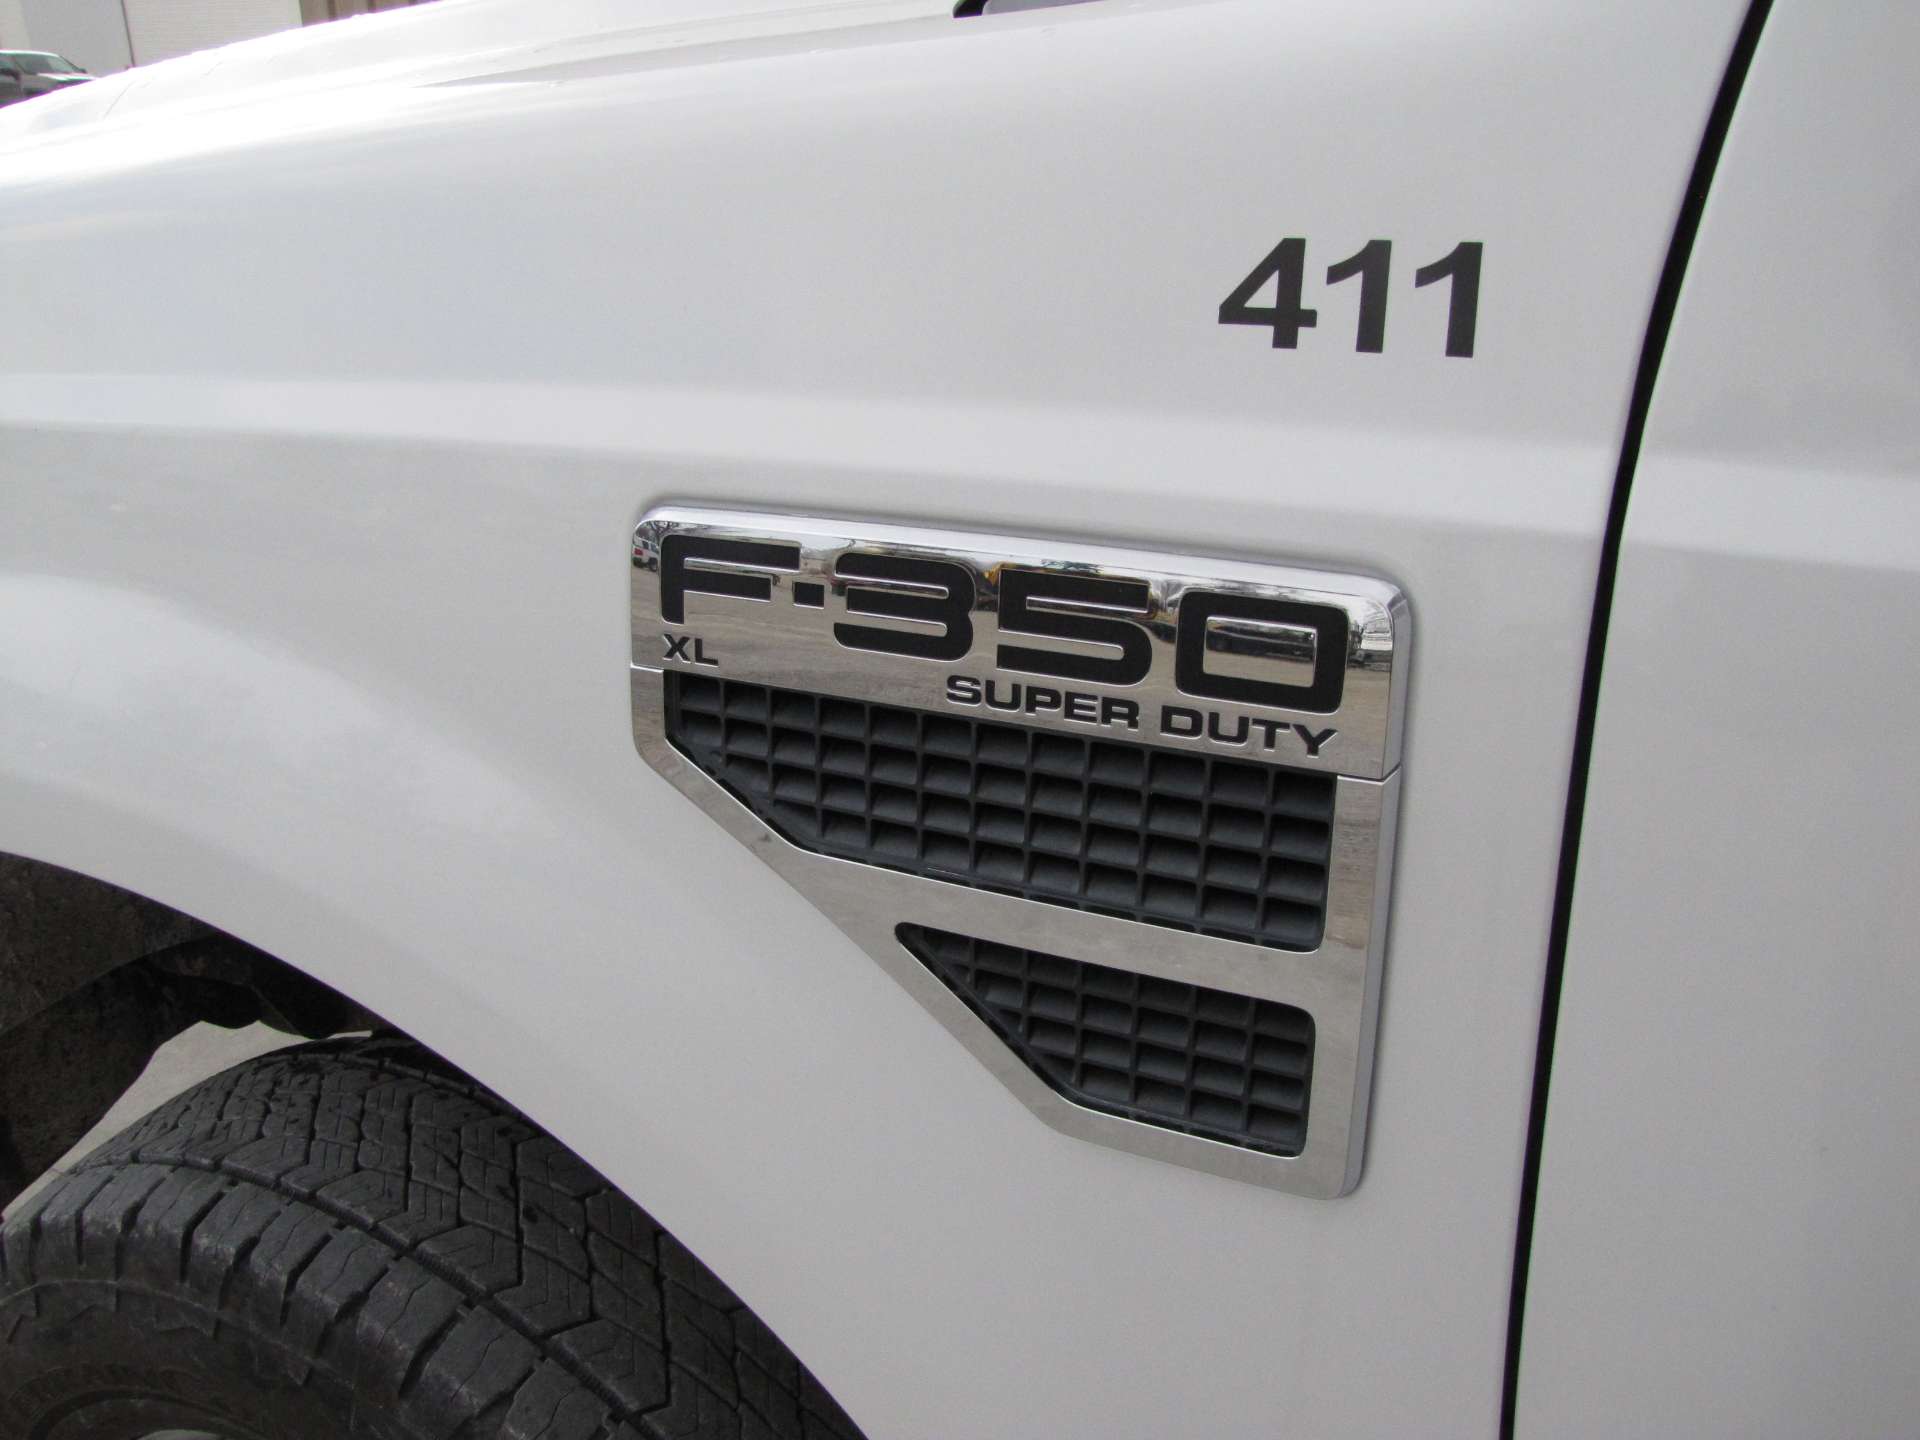 2009 Ford F350 XL Super Duty pickup truck - Image 19 of 55